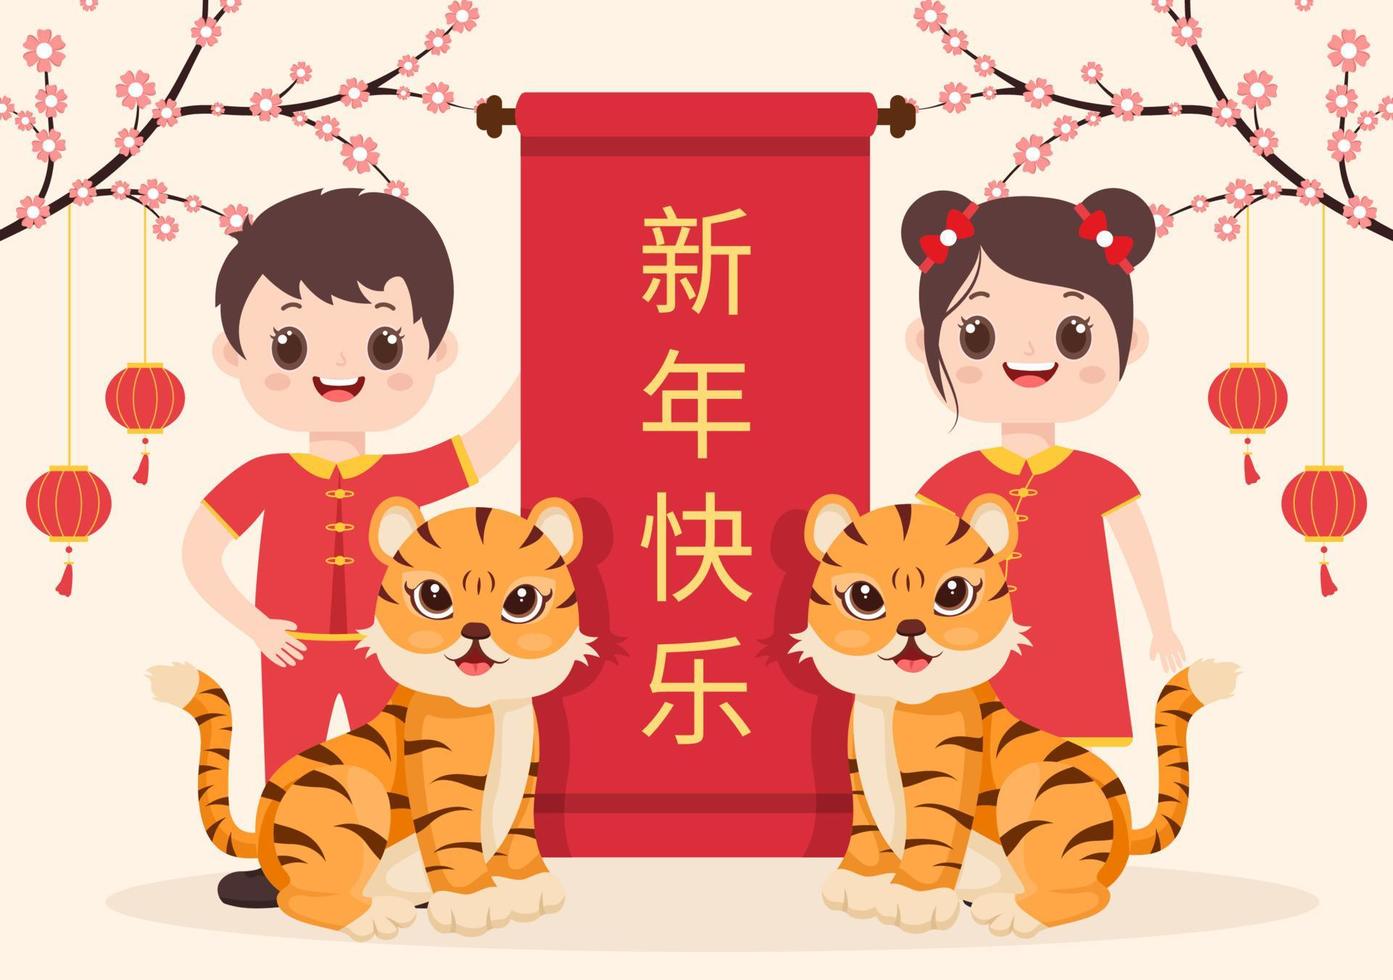 Happy Chinese New Year 2022 with Zodiac Cute Tiger and Kids on Red Background for Greeting Card, Calendar or Poster in Flat Design Illustration vector